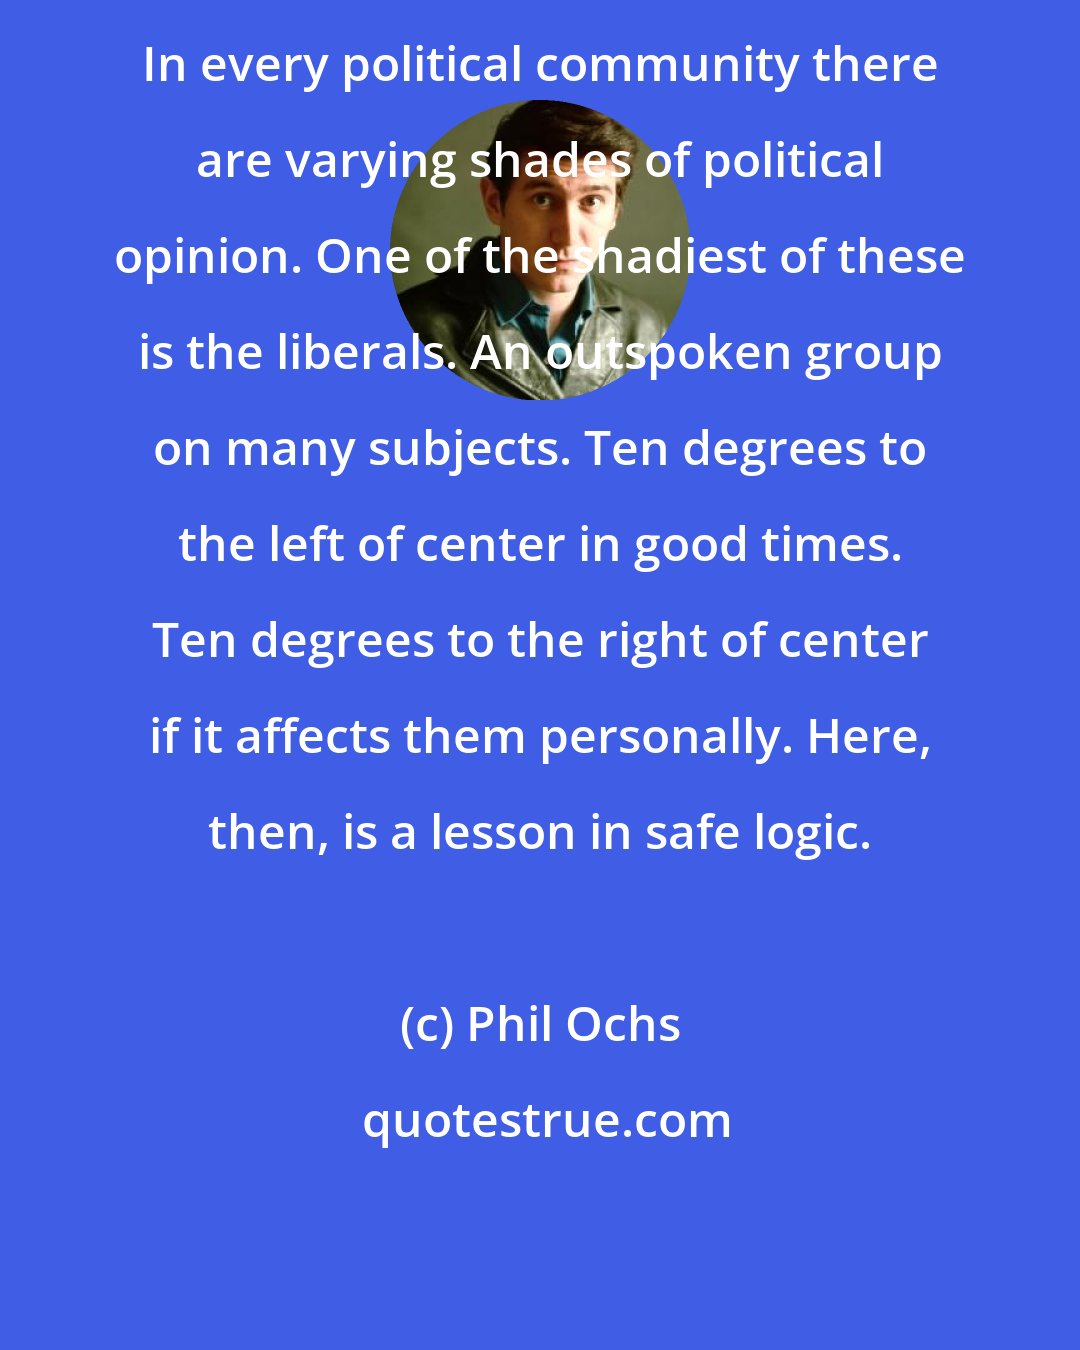 Phil Ochs: In every political community there are varying shades of political opinion. One of the shadiest of these is the liberals. An outspoken group on many subjects. Ten degrees to the left of center in good times. Ten degrees to the right of center if it affects them personally. Here, then, is a lesson in safe logic.